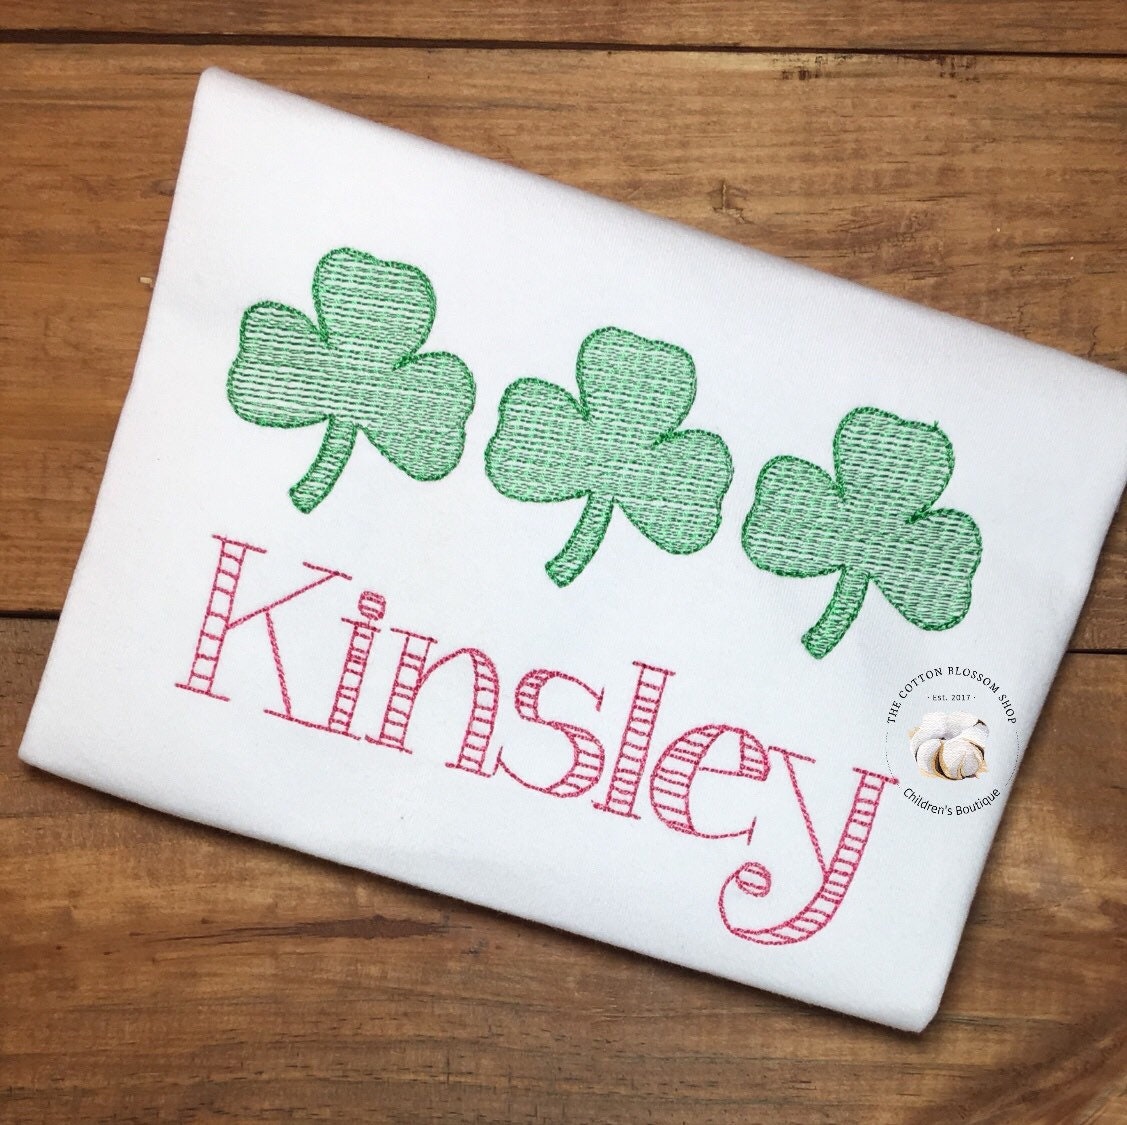 Girls St. Patrick's Day Shirt, Personalized St. Patrick's Day Shirt, Girls St. Patrick's Day shirt, Monogrammed St. Patrick's Day Shirt